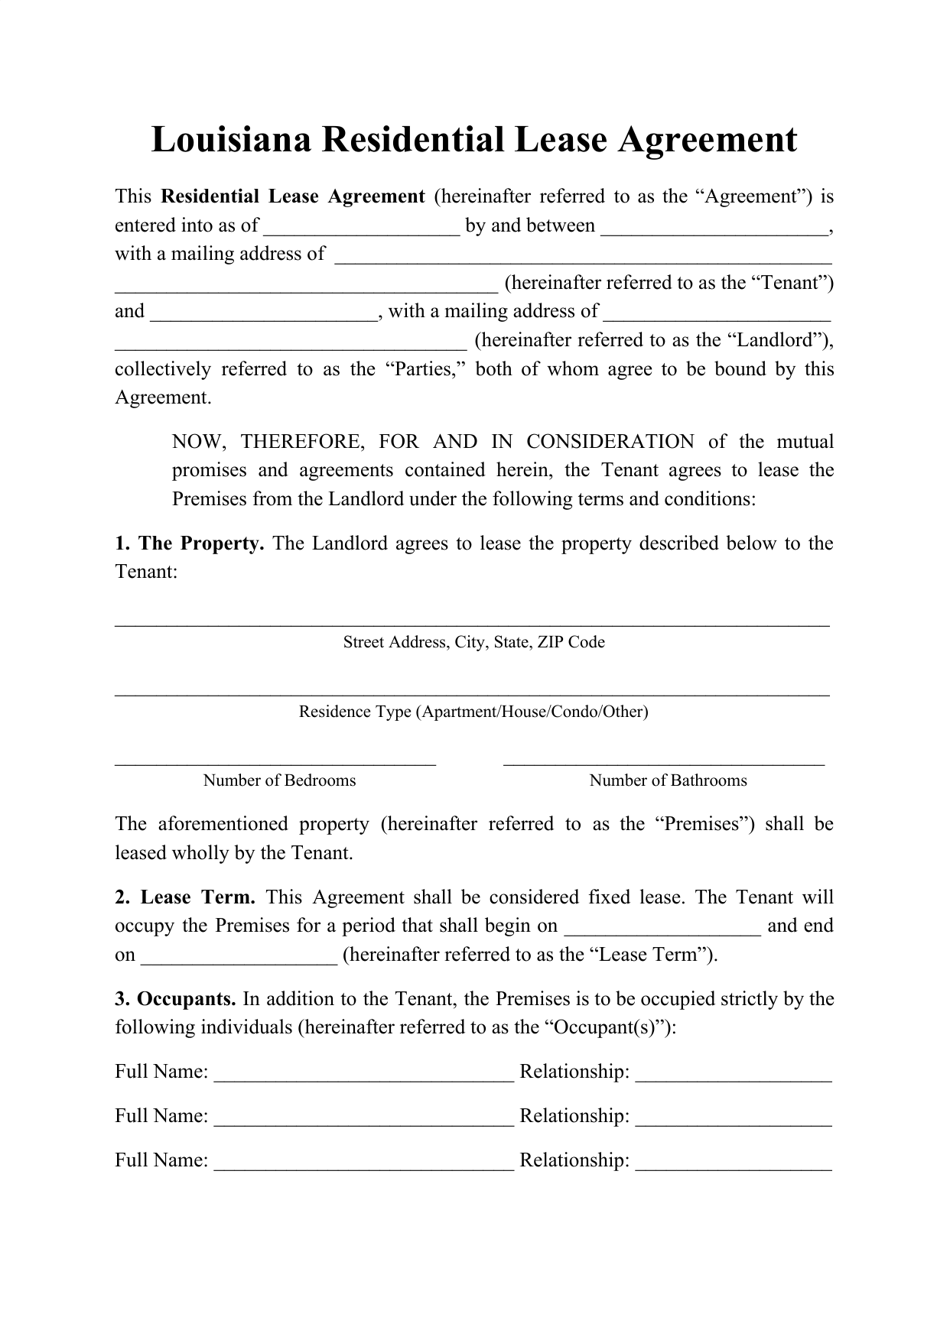 Louisiana Residential Lease Agreement Template Fill Out Sign Online